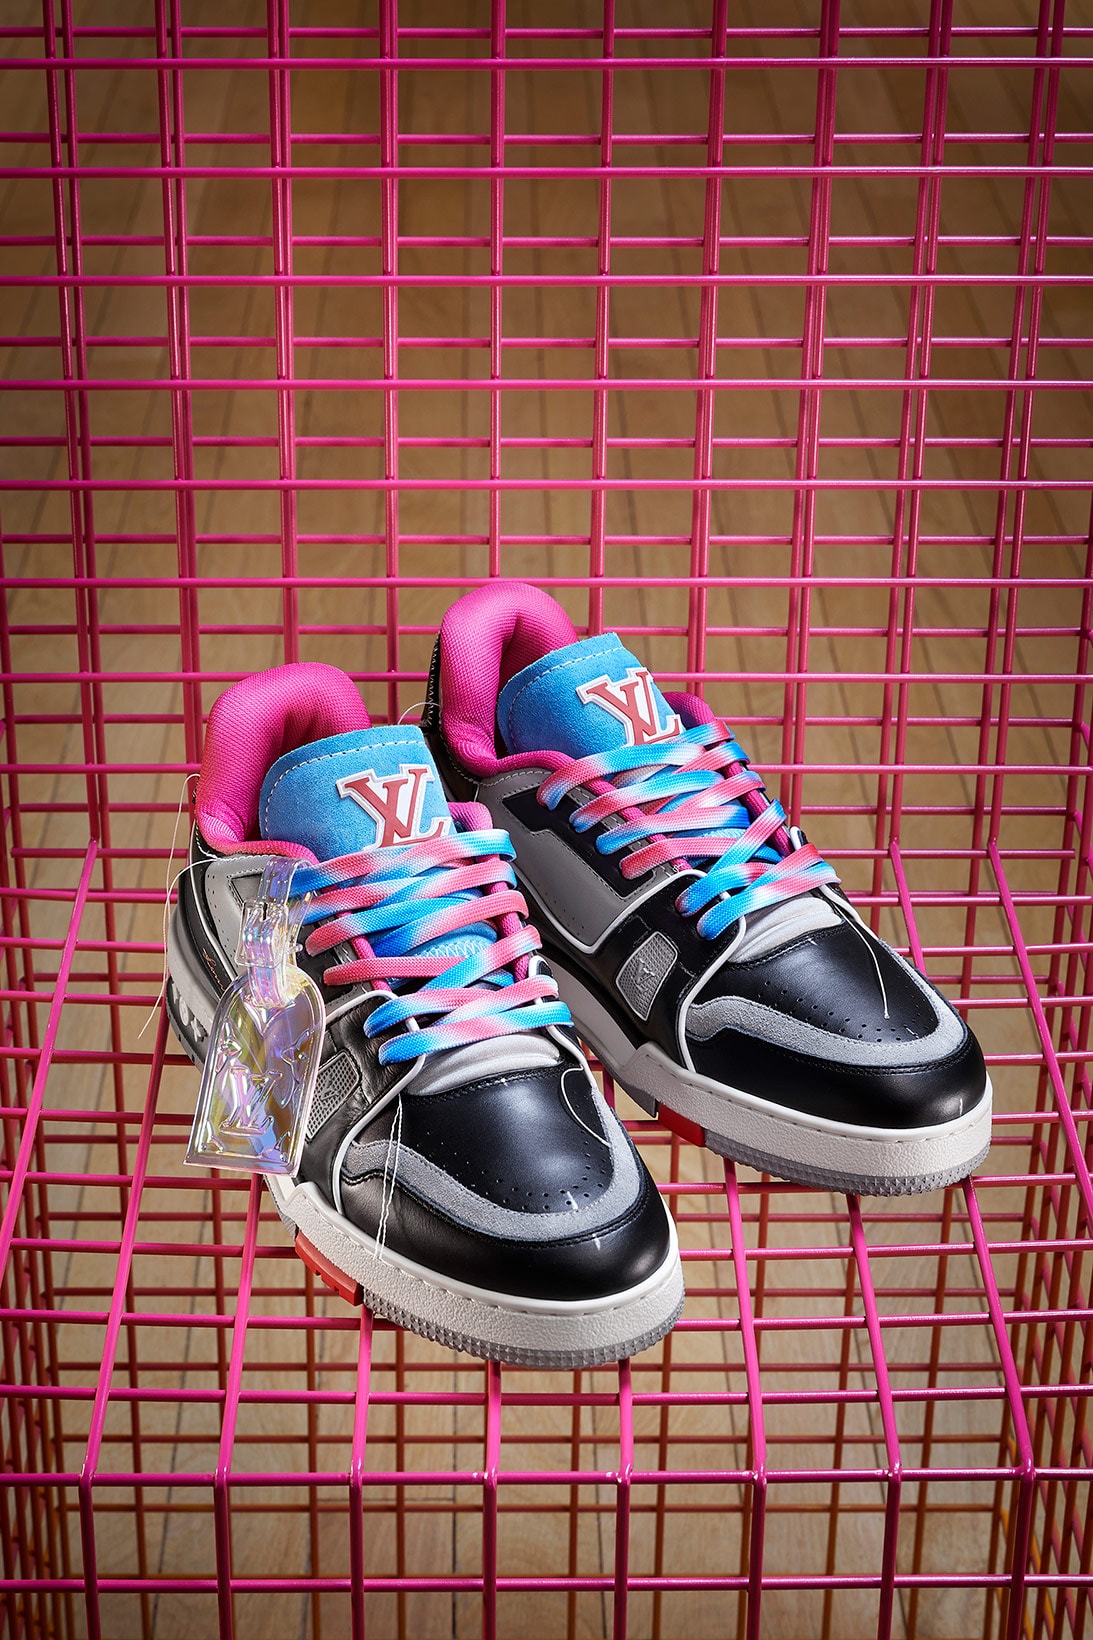 louis vuitton lv sneakers trainers upcycling mens spring summer collection sustainable customizable virgil abloh black gray pink blue white